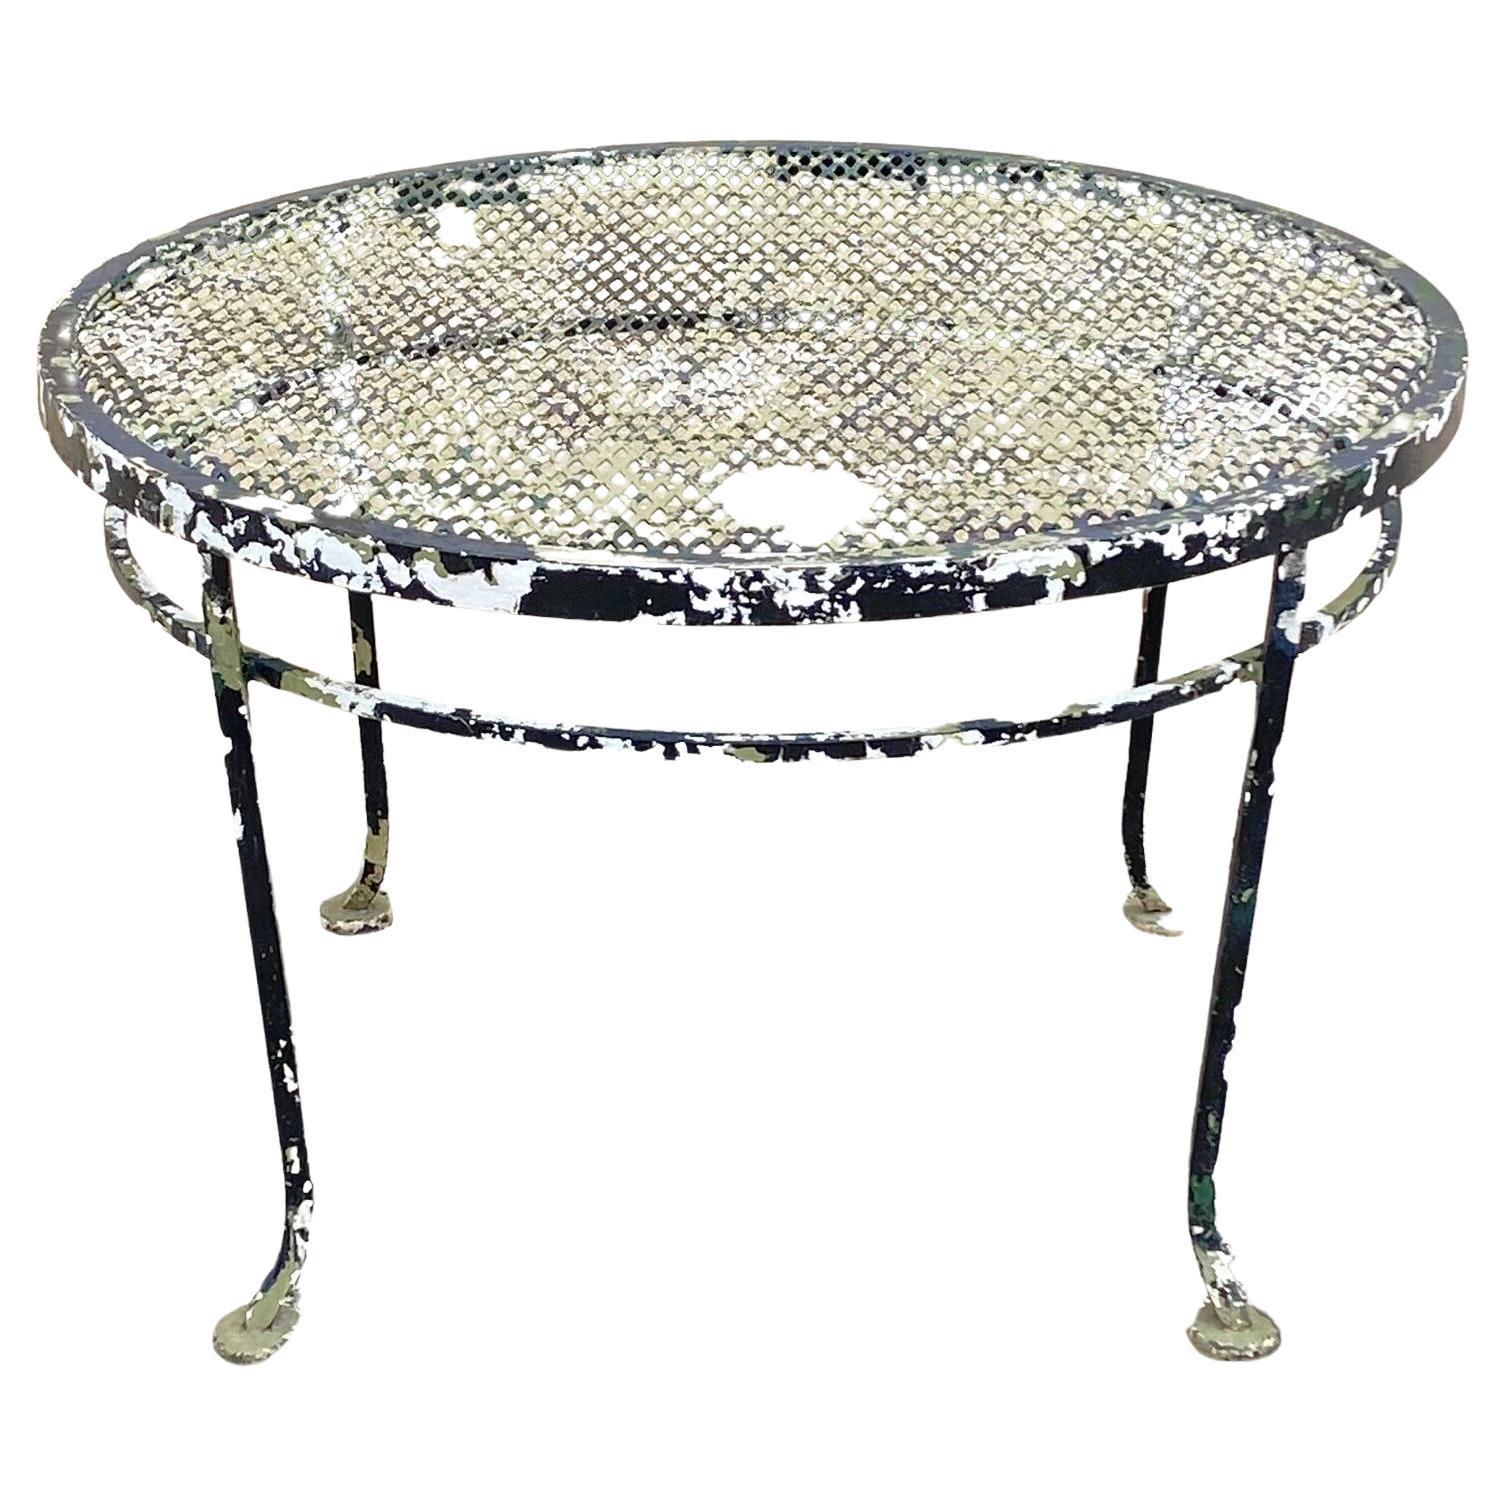 Vintage Modern Wrought Iron Distress Painted 26" Round Garden Patio Coffee Table For Sale